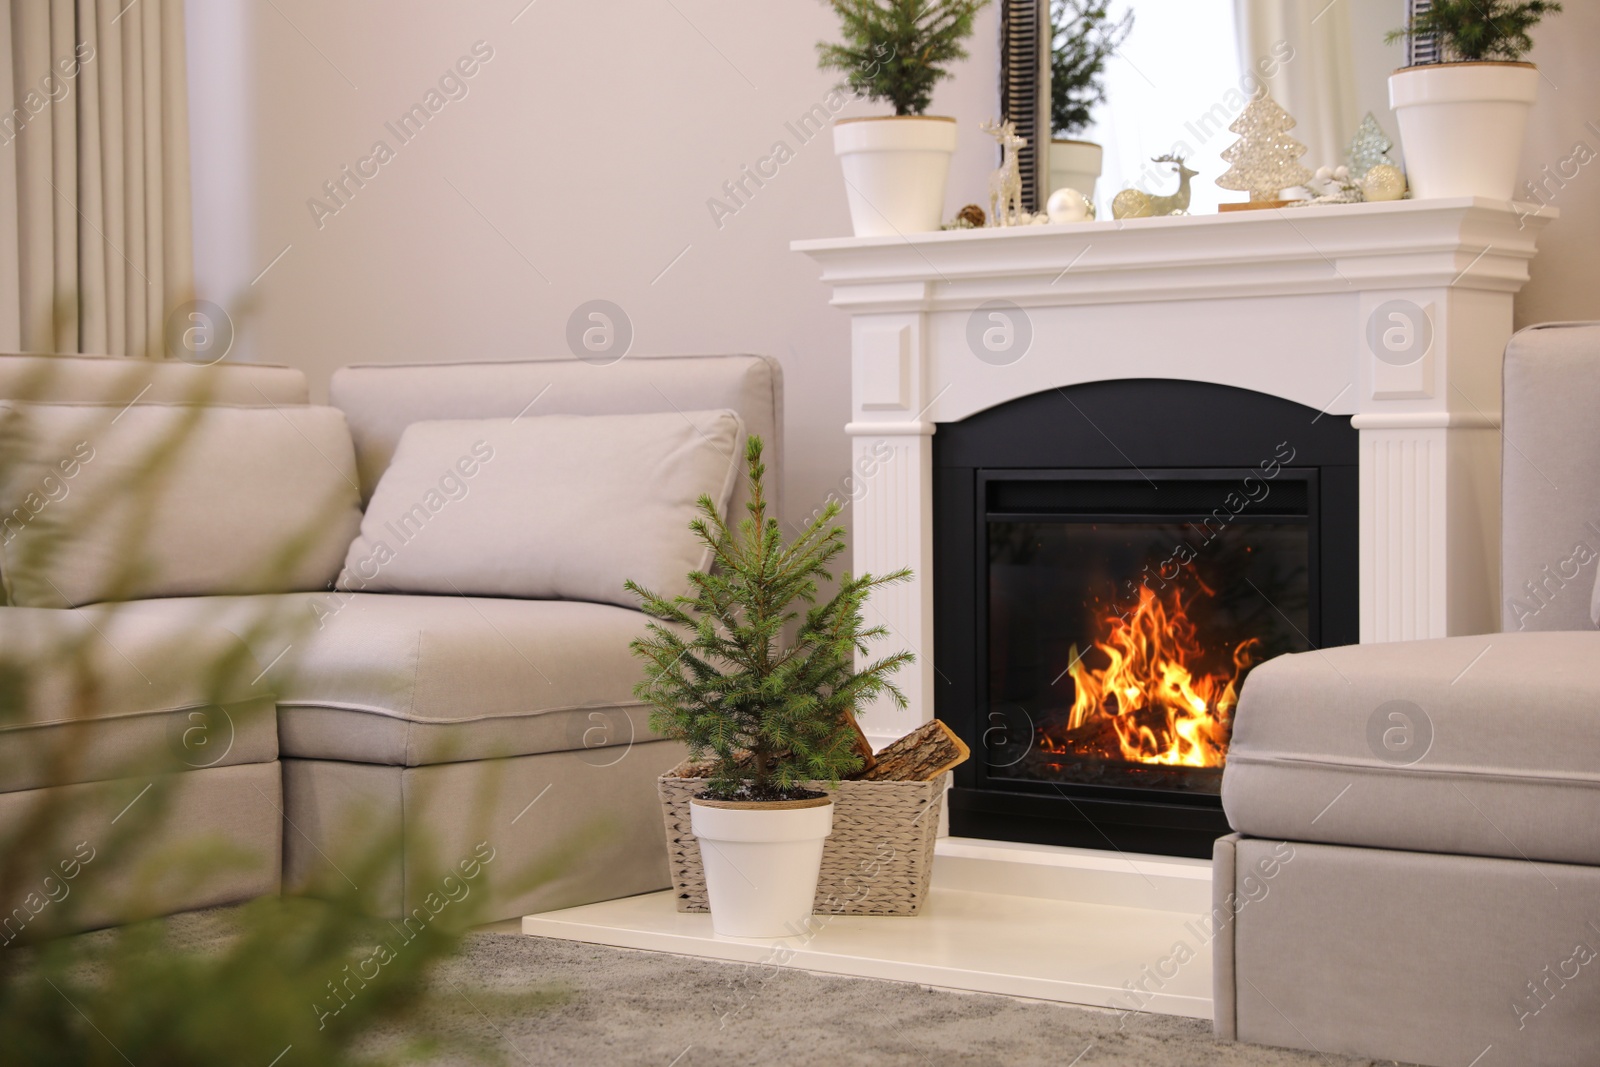 Photo of Little fir trees and Christmas decorations in room with fireplace. Stylish interior design